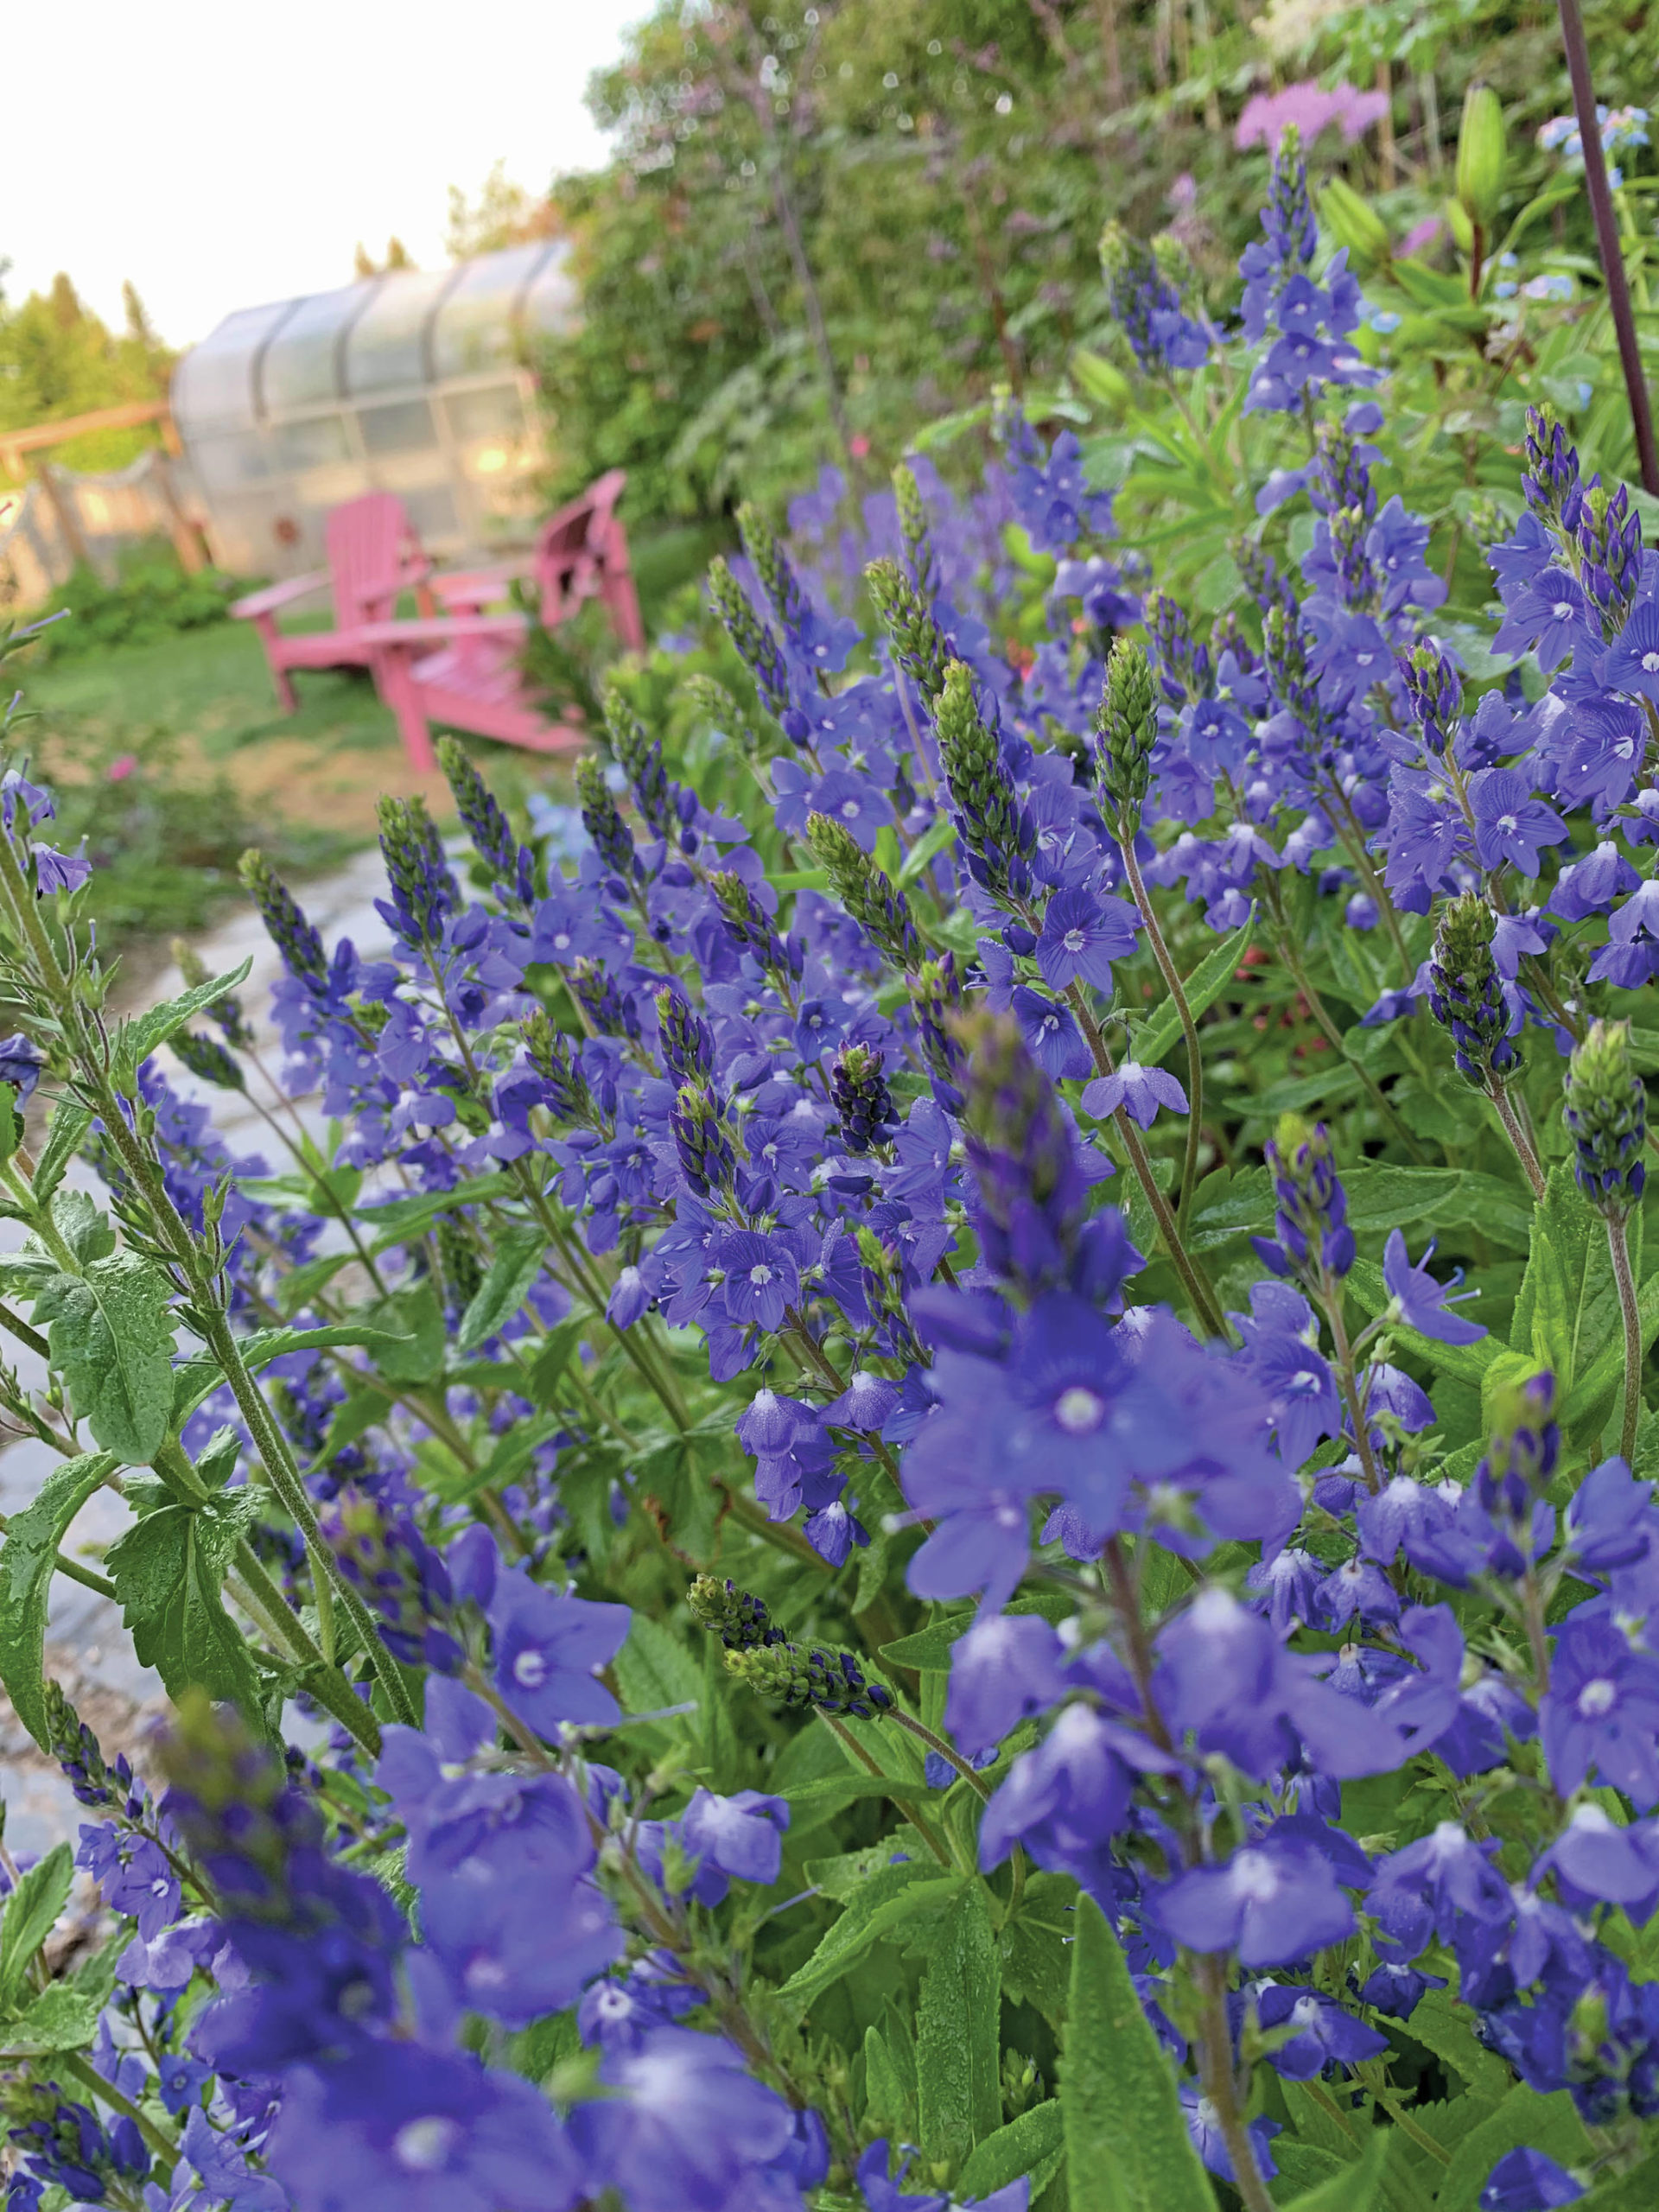 Veronica in full vibrant bloom is a welcome sight in the perennial border. (Photo by Rosemary Fitzpatrick)